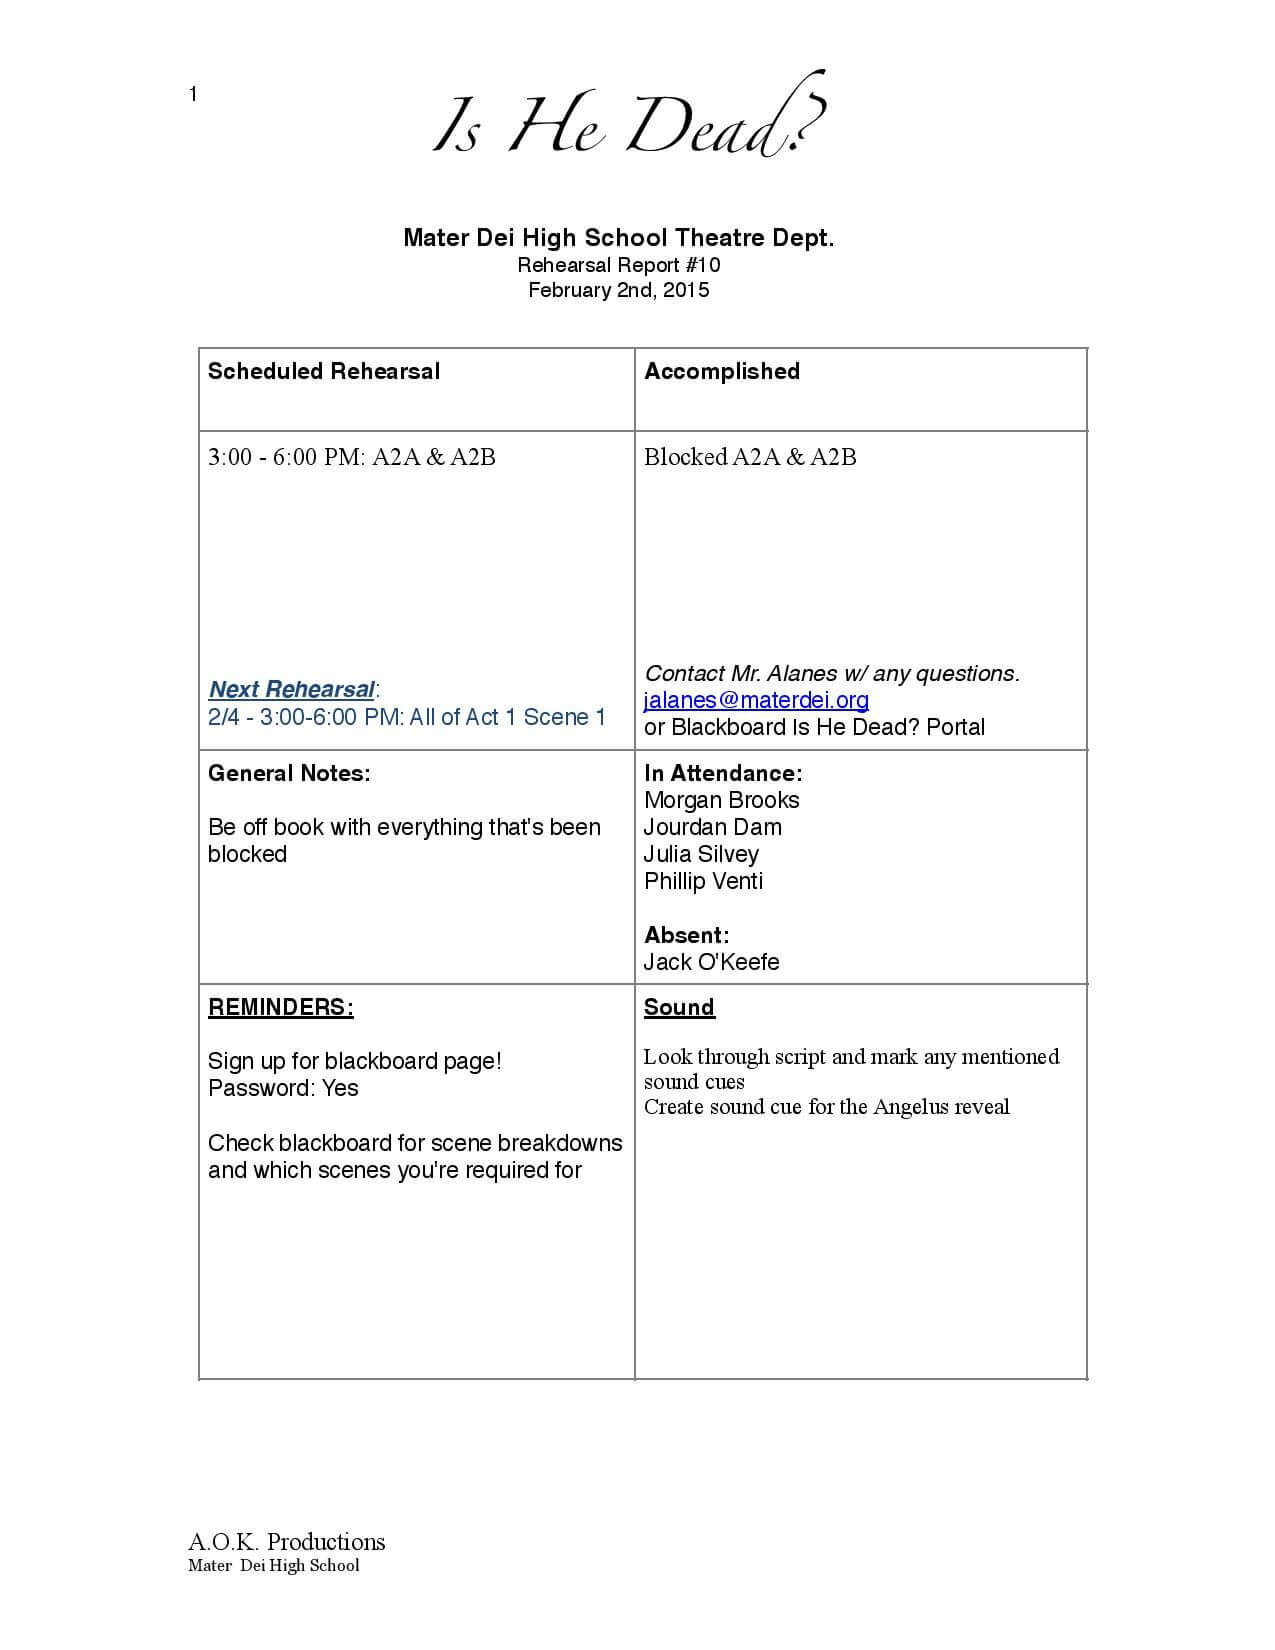 Page 1 Of Is He Dead? Rehearsal Report Example | Stage For Rehearsal Report Template